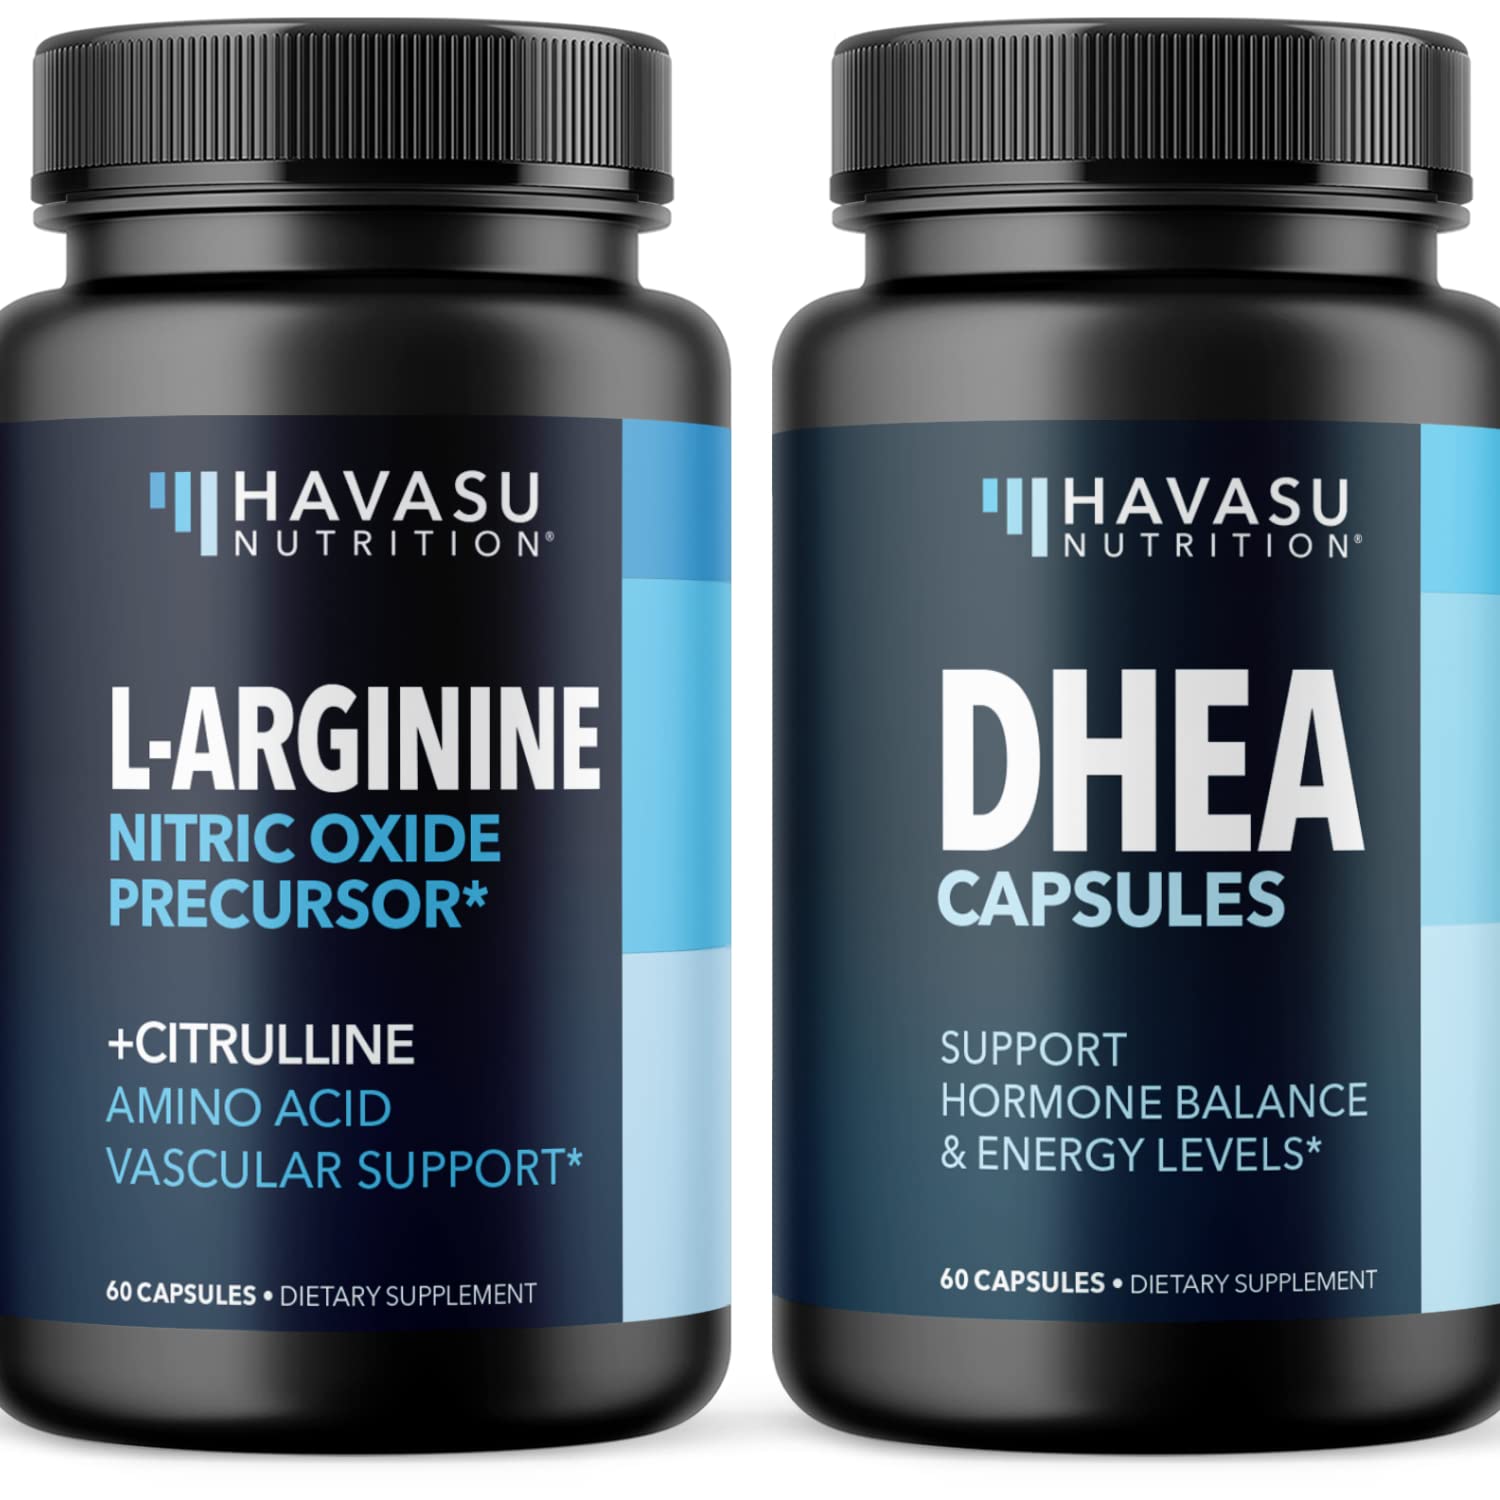 HAVASU NUTRITION L Arginine and DHEA Capsules with Potent Ingredients for The Ultimate Male Enhancing Supplement for Overall Health and Vascular Support